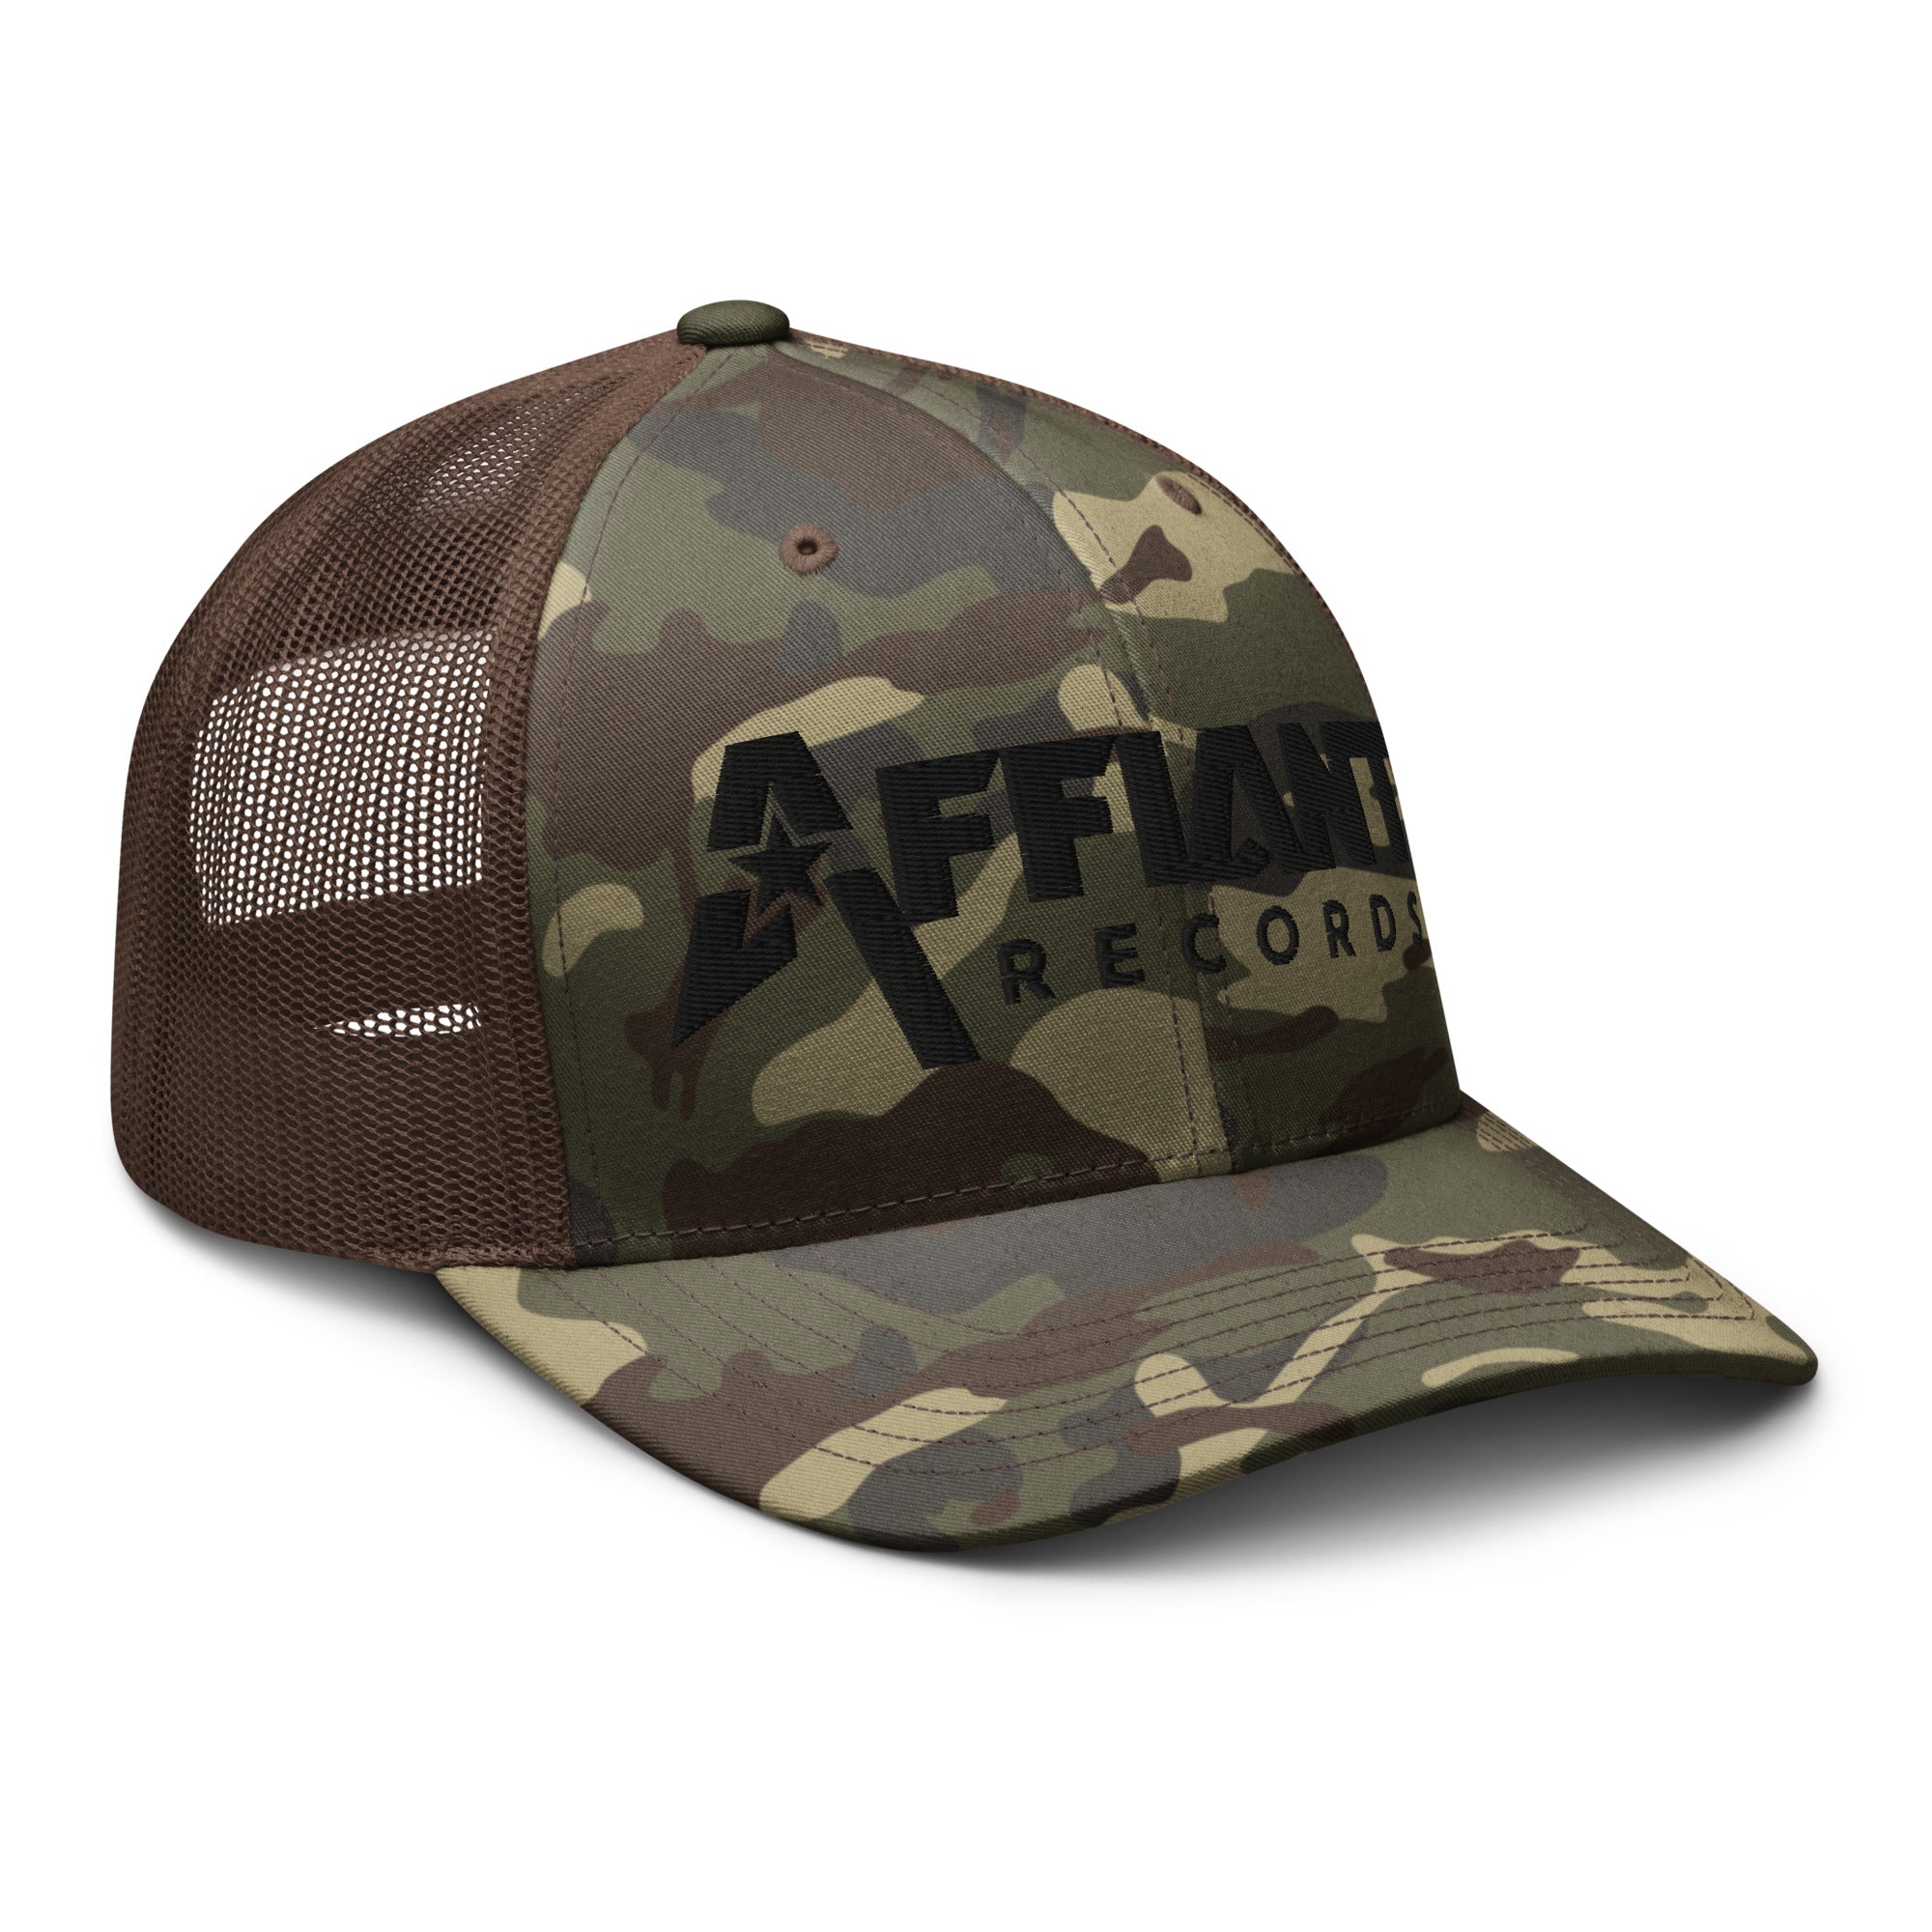 AFFIANT RECORDS - CAMOUFLAGE TRUCKER HAT